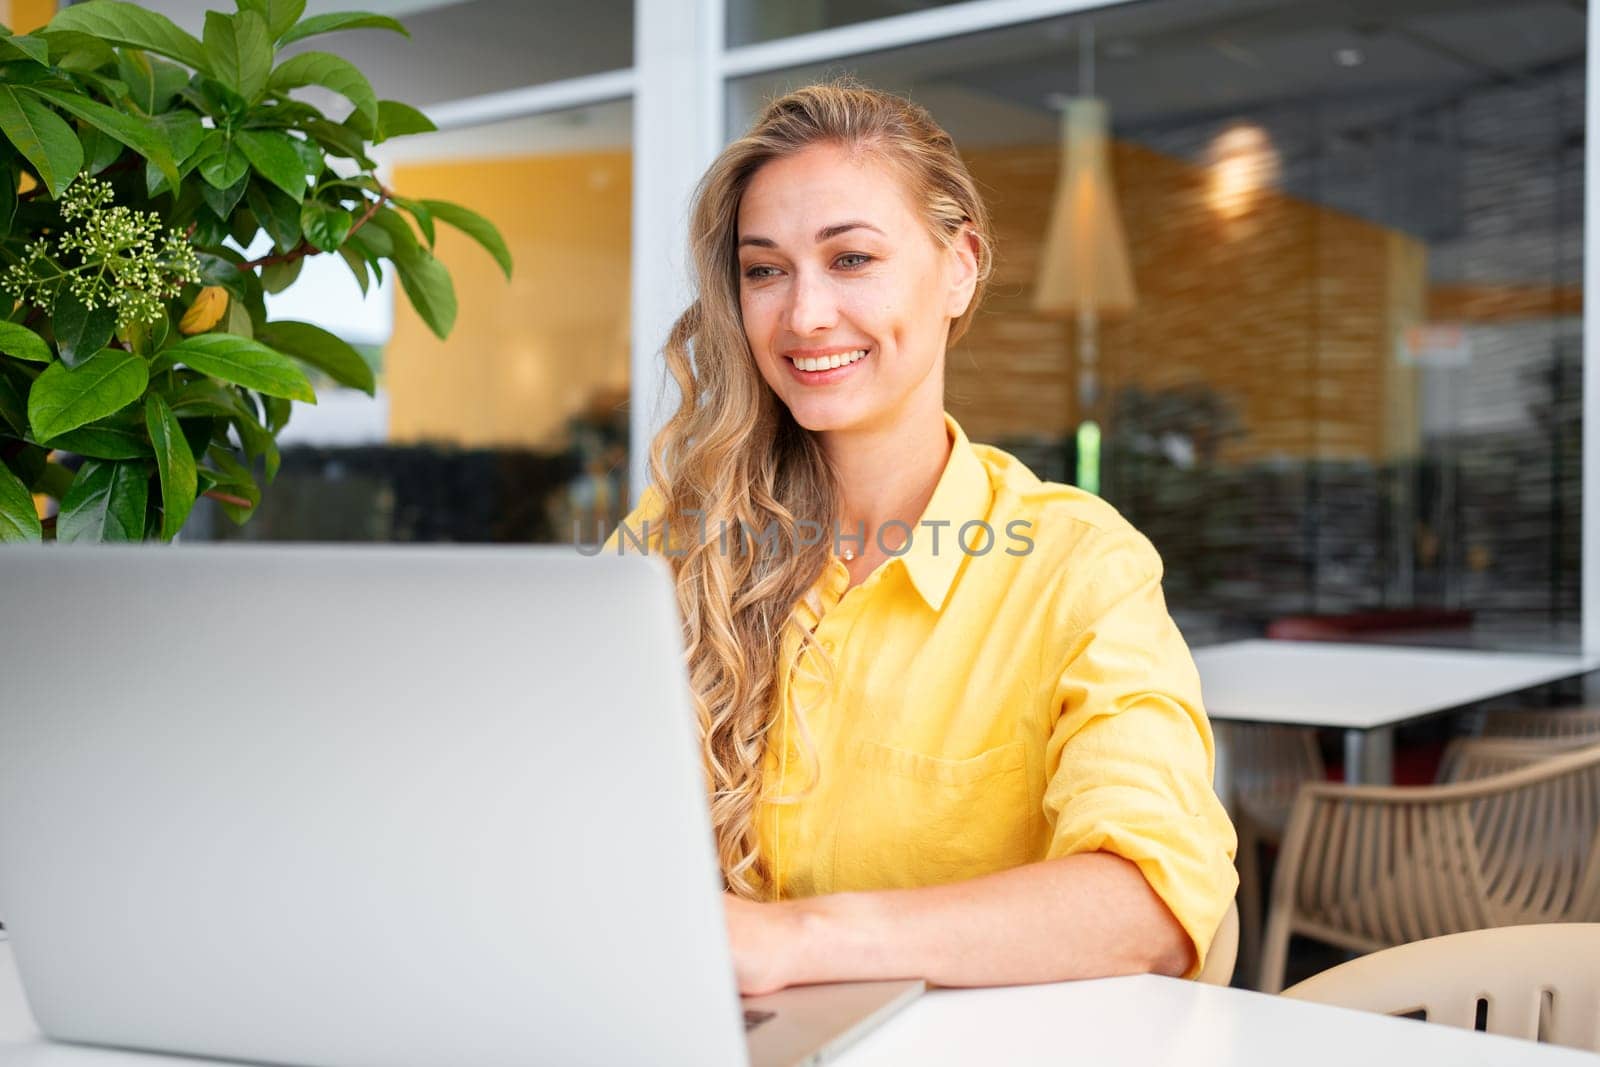 Freelance woman using laptop outdoor. Freelance worker sitting at cafe terrace remote working. Professional freelancer wearing yellow jacket sitting under green plant at cafe table with computer.